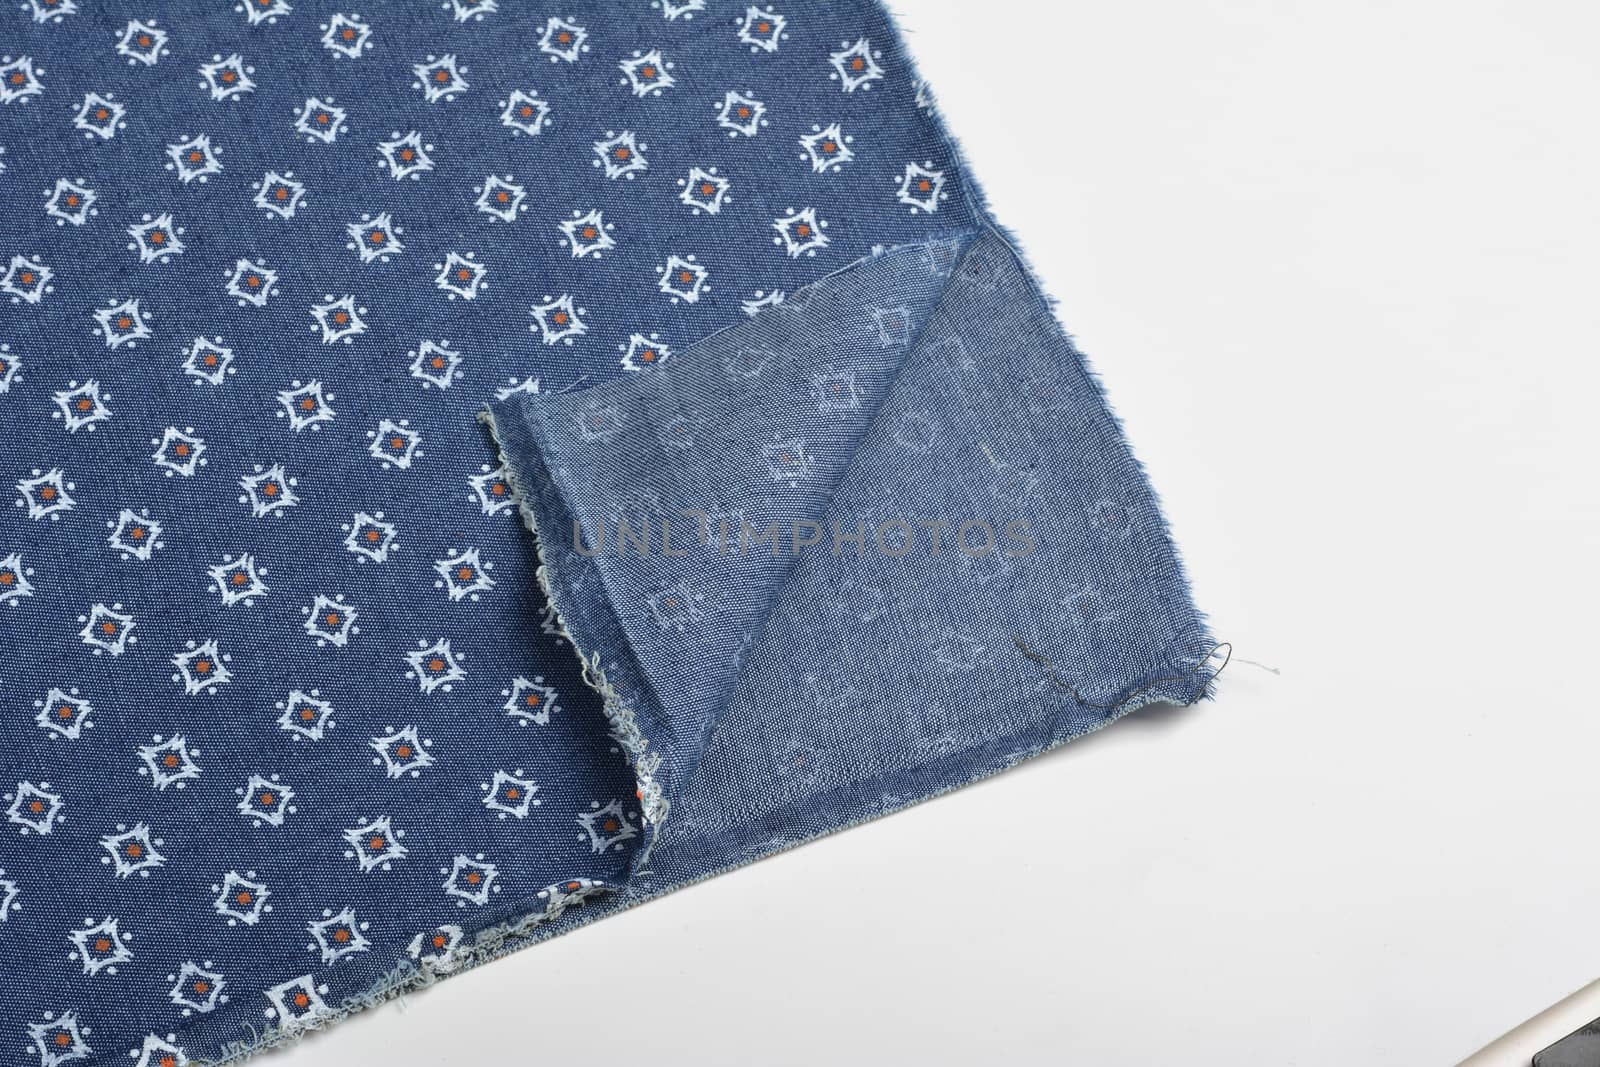 blue fabric texture, closeup, background. Use for sewing and tailoring, Sew dress and cloth